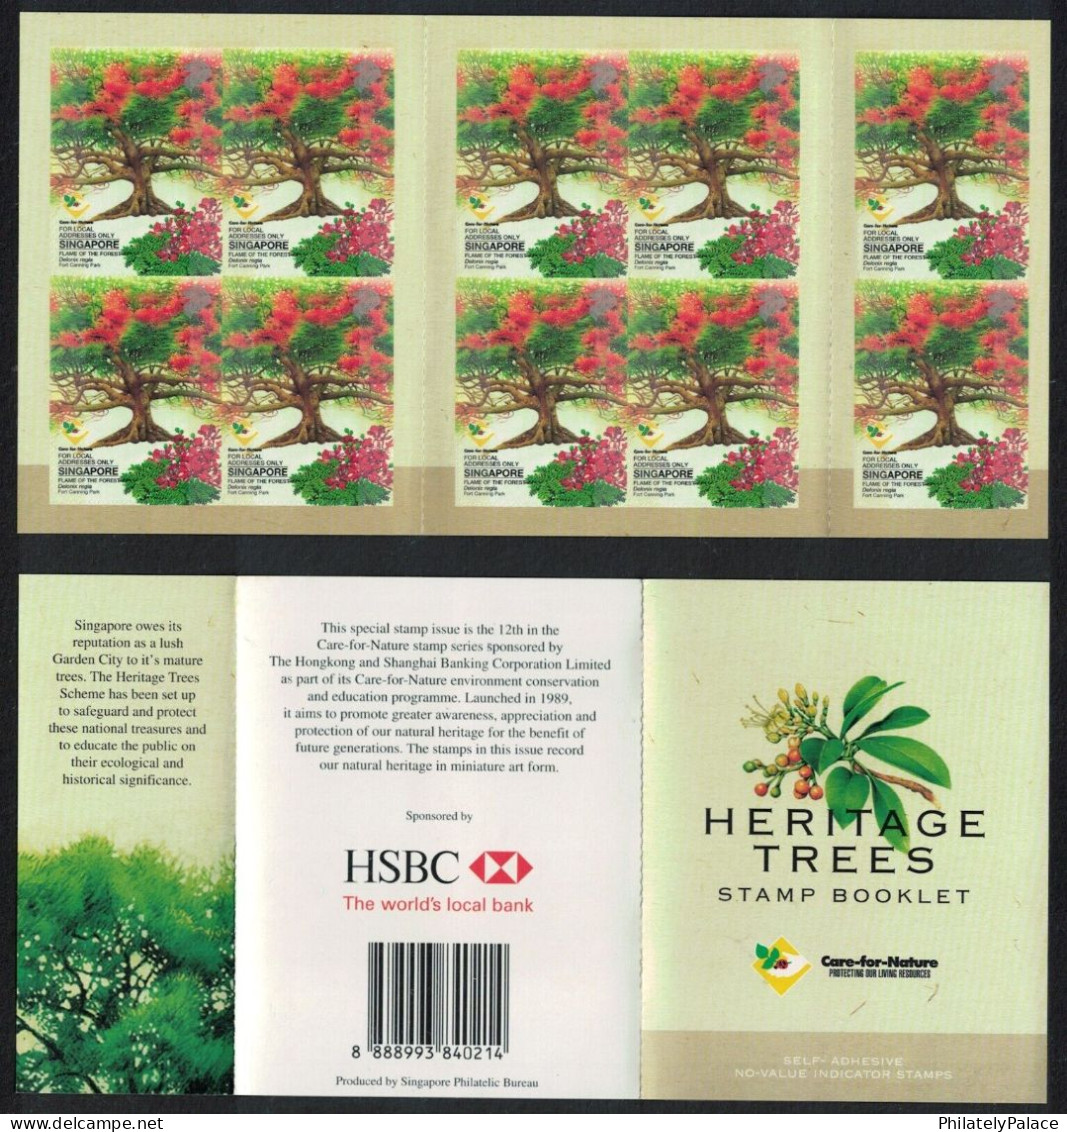 SINGAPORE 2002 HERITAGE TREES CARE FOR NATURE SERIES,HSBC BANK, BOOKLET OF 10 STAMPS MNH (**) - Singapore (1959-...)